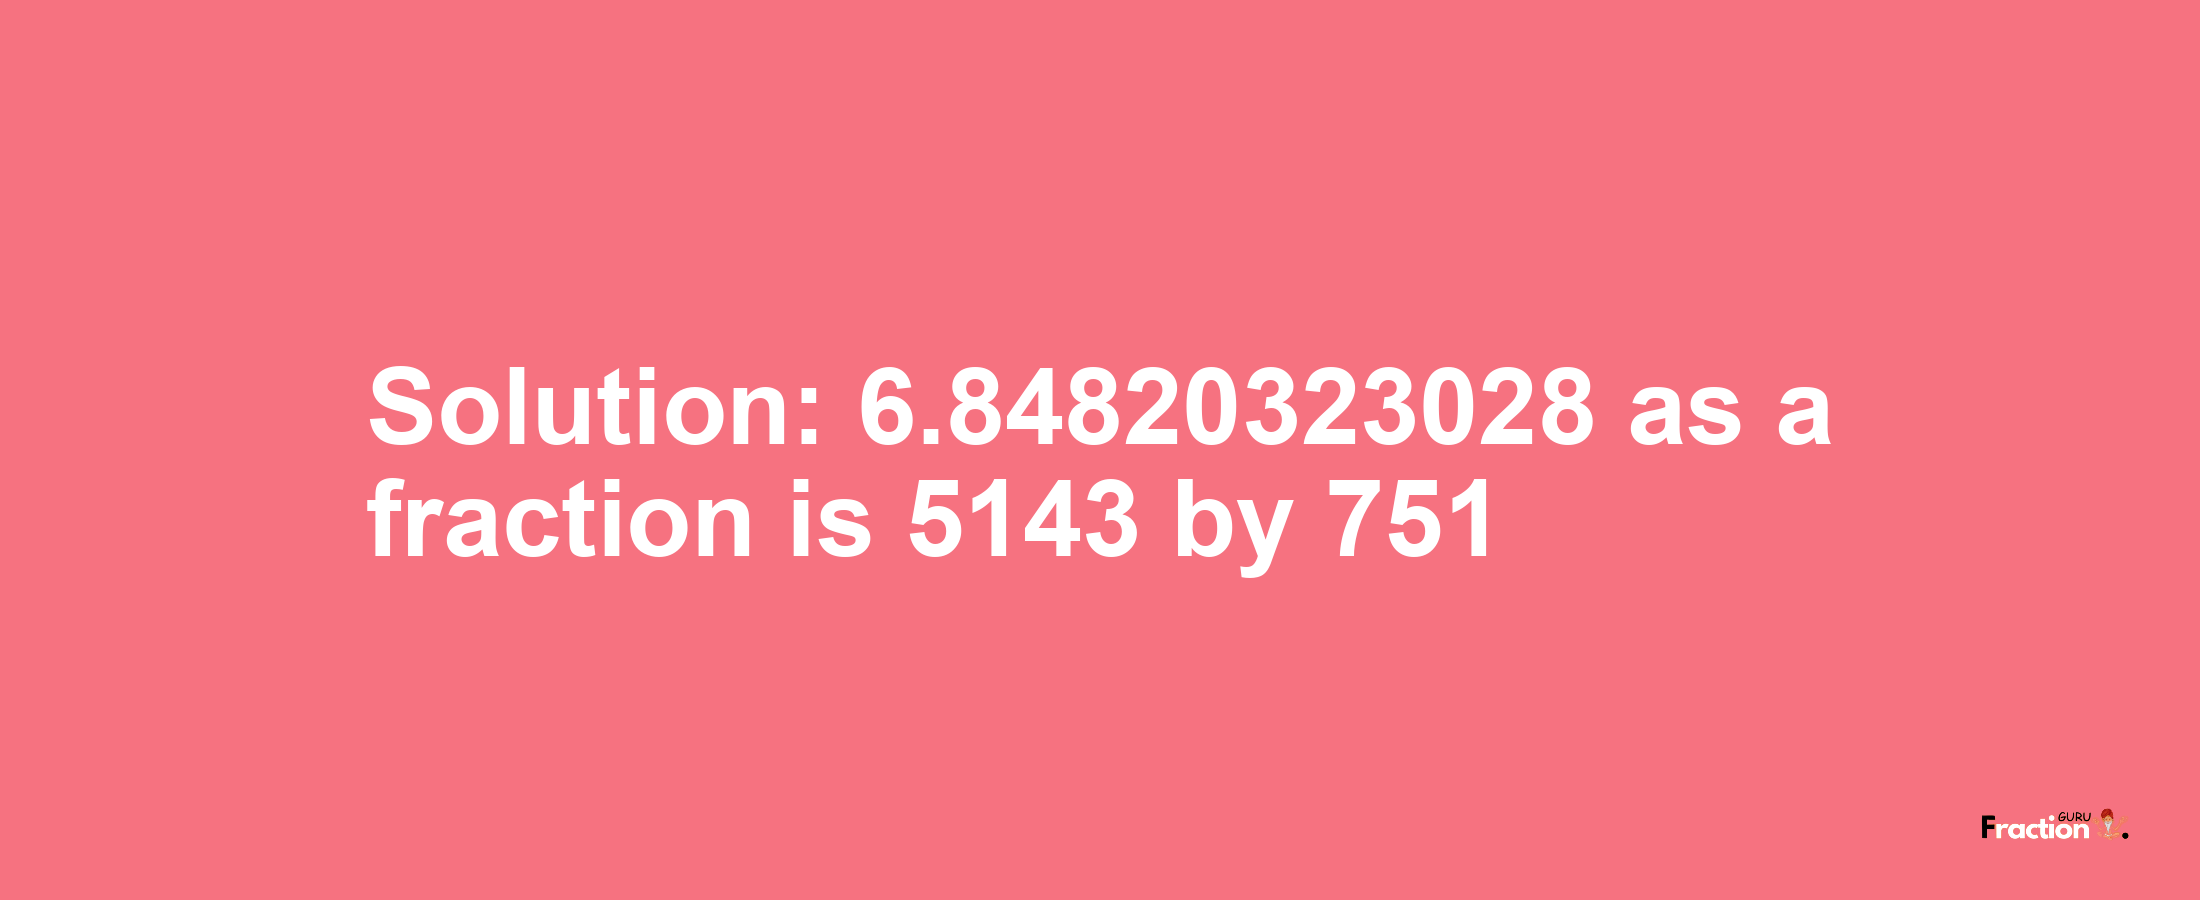 Solution:6.84820323028 as a fraction is 5143/751